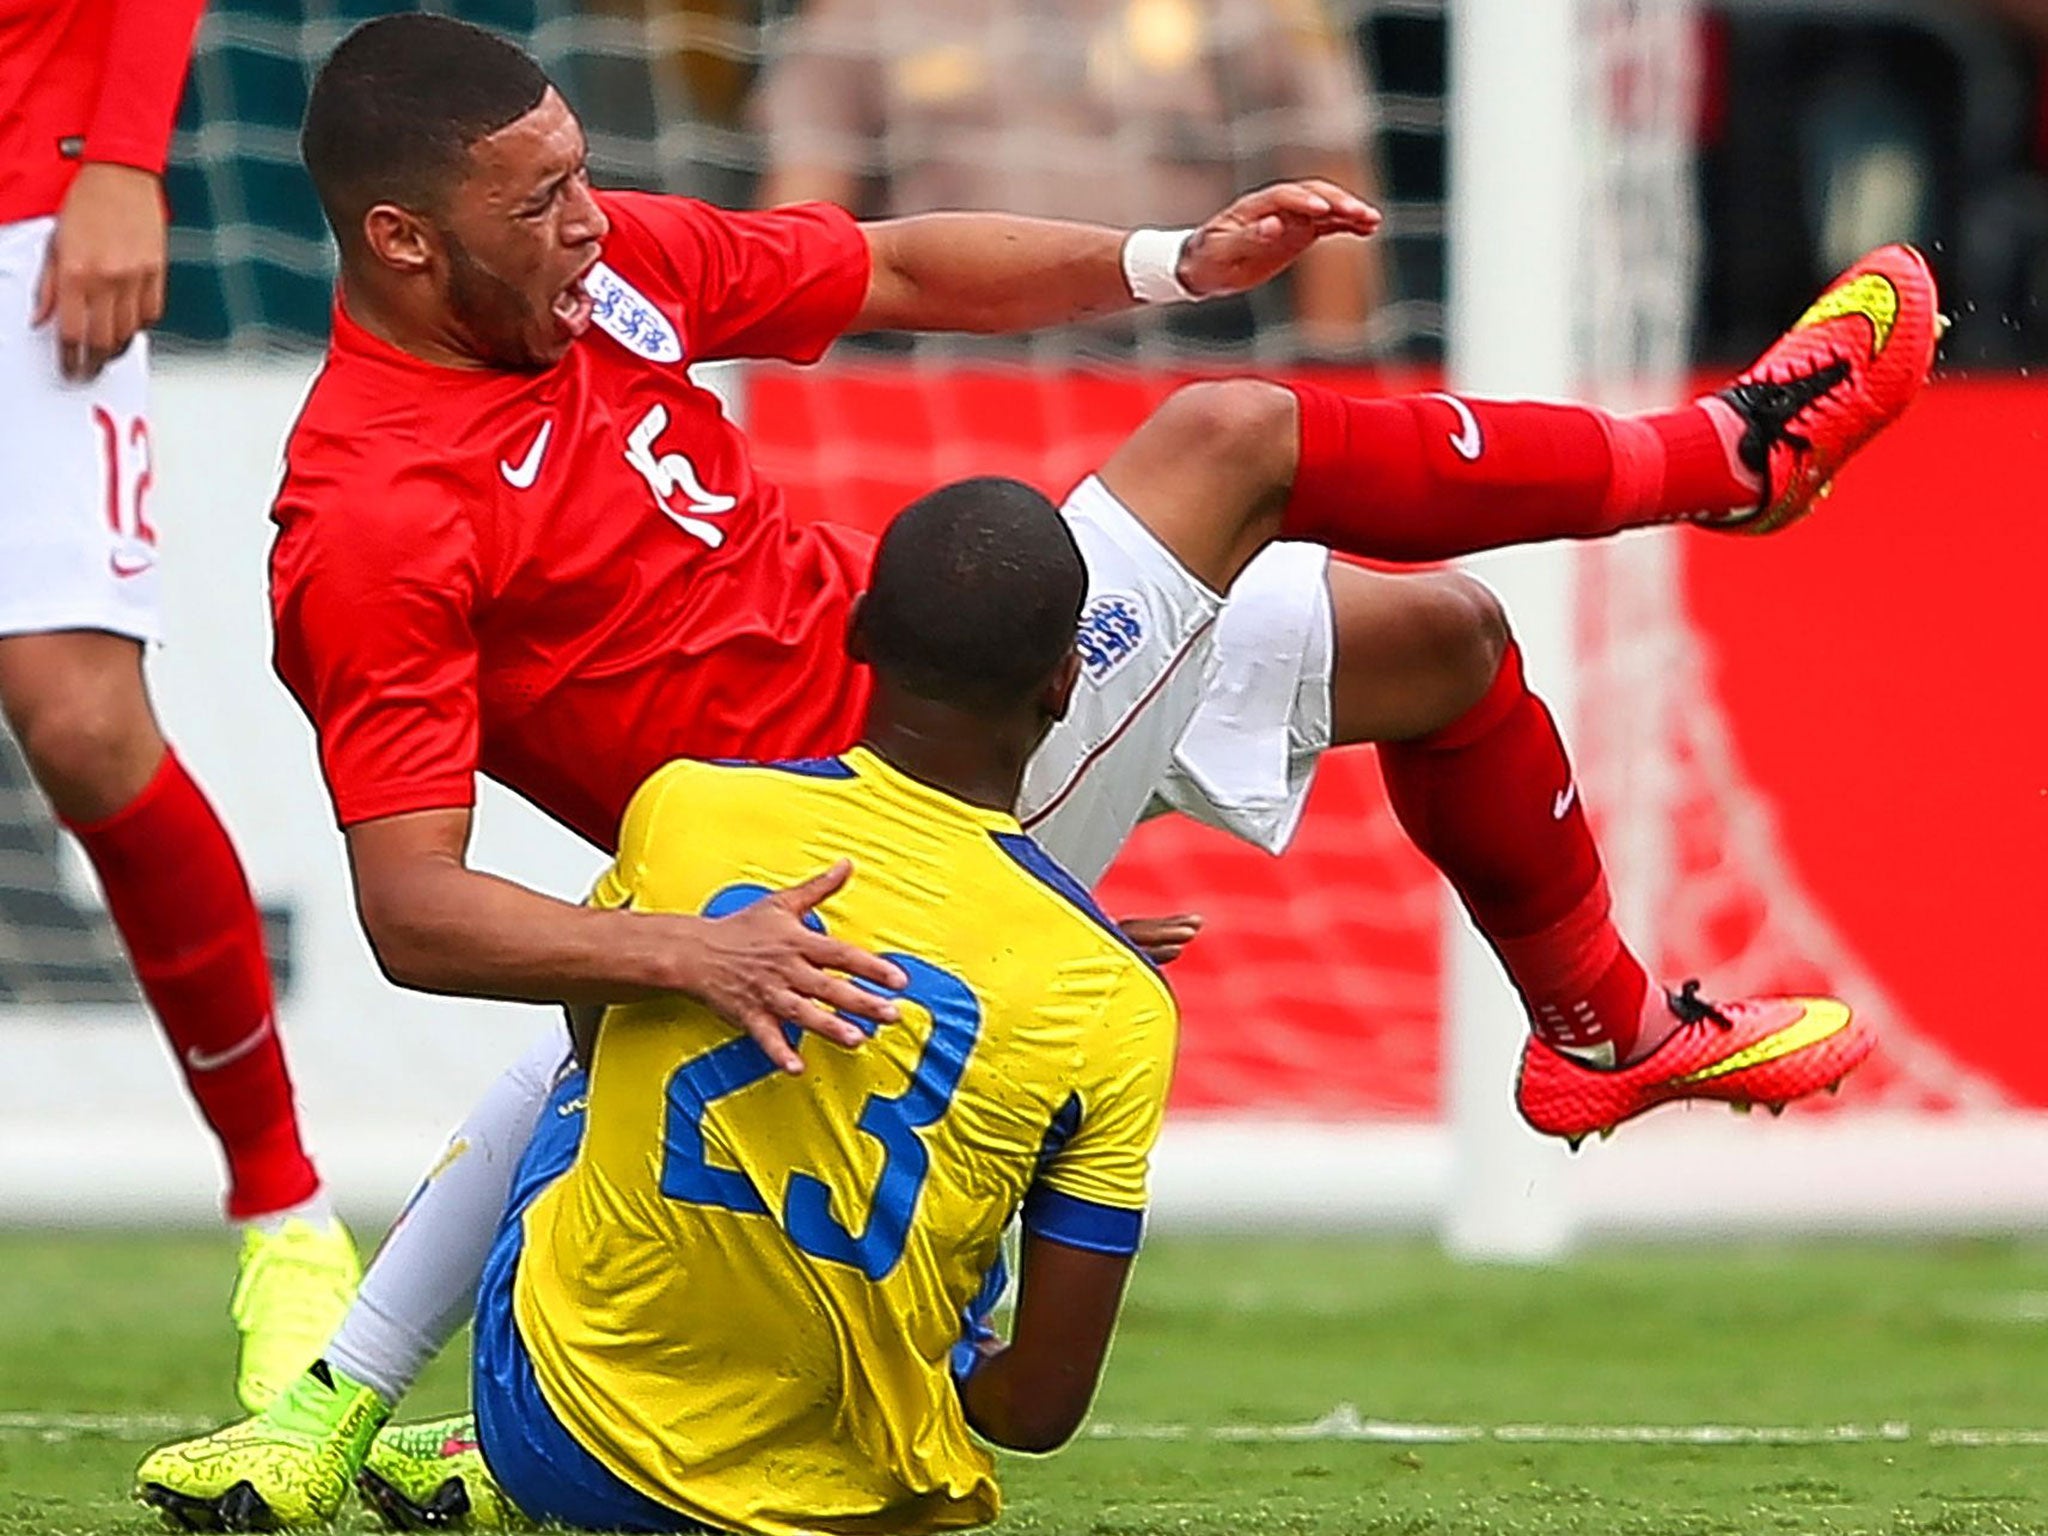 Alex Oxlade-Chamberlain goes down in pain under a challenge from Carlos Gruezo at the Sun Life Stadium in Miami